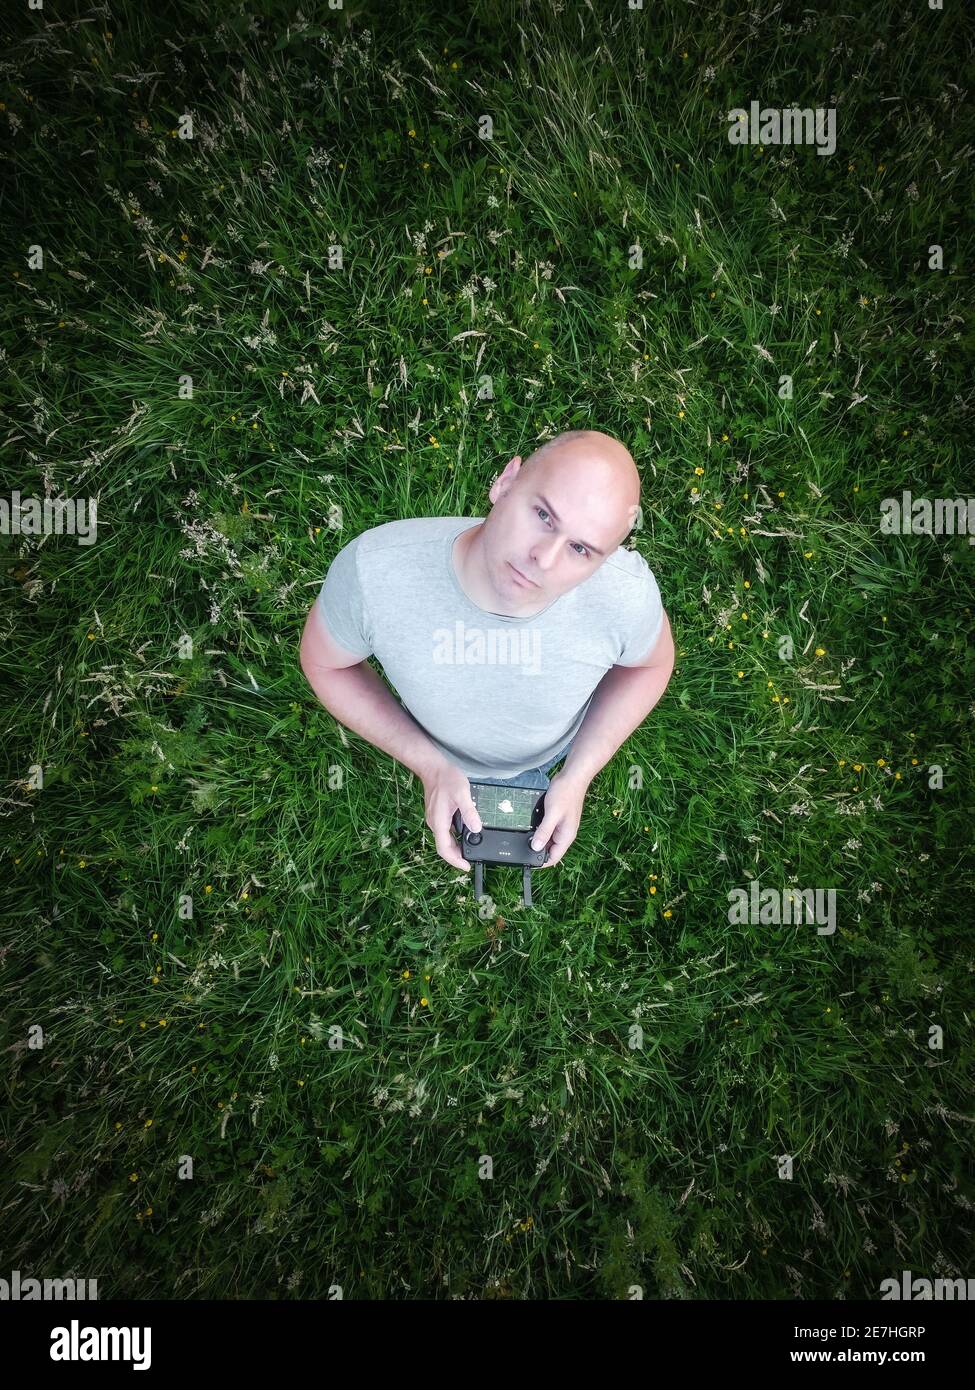 Man alone looking up at flying drone from below on ground holding controller and mobile phone in hands stood in field look to sky wearing t-shirt Stock Photo